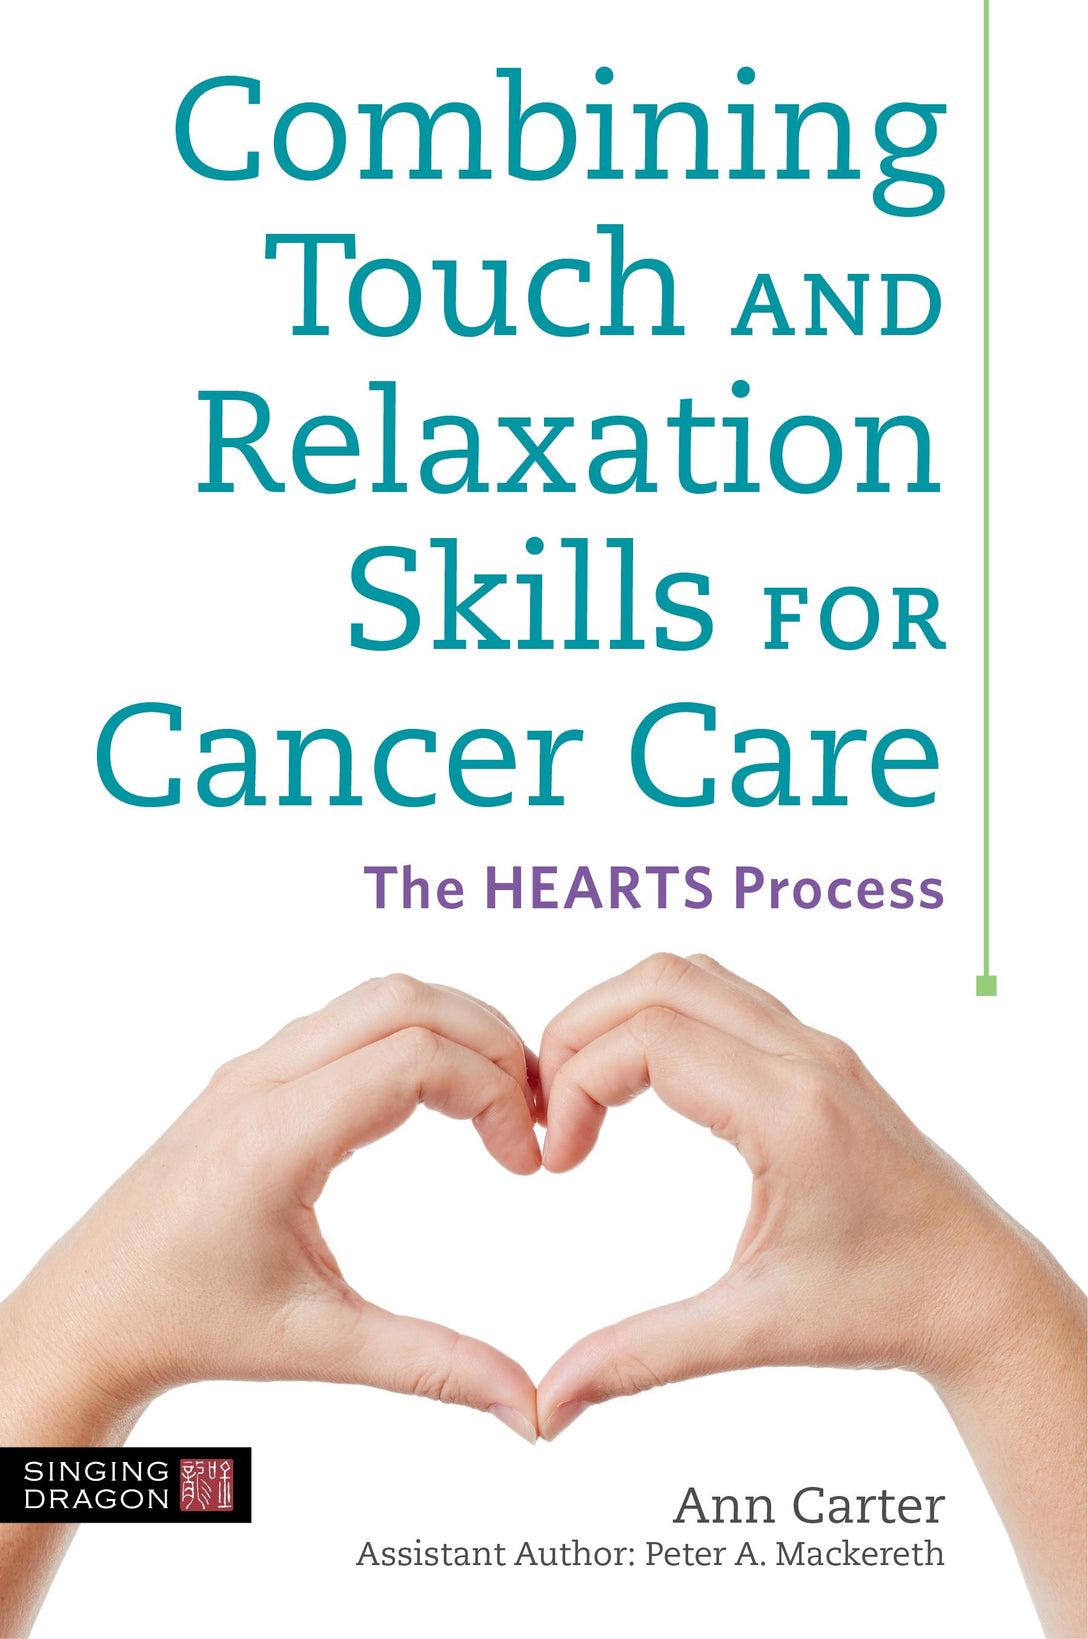 Combining Touch and Relaxation Skills for Cancer Care by Ann Carter, Peter A. Mackereth